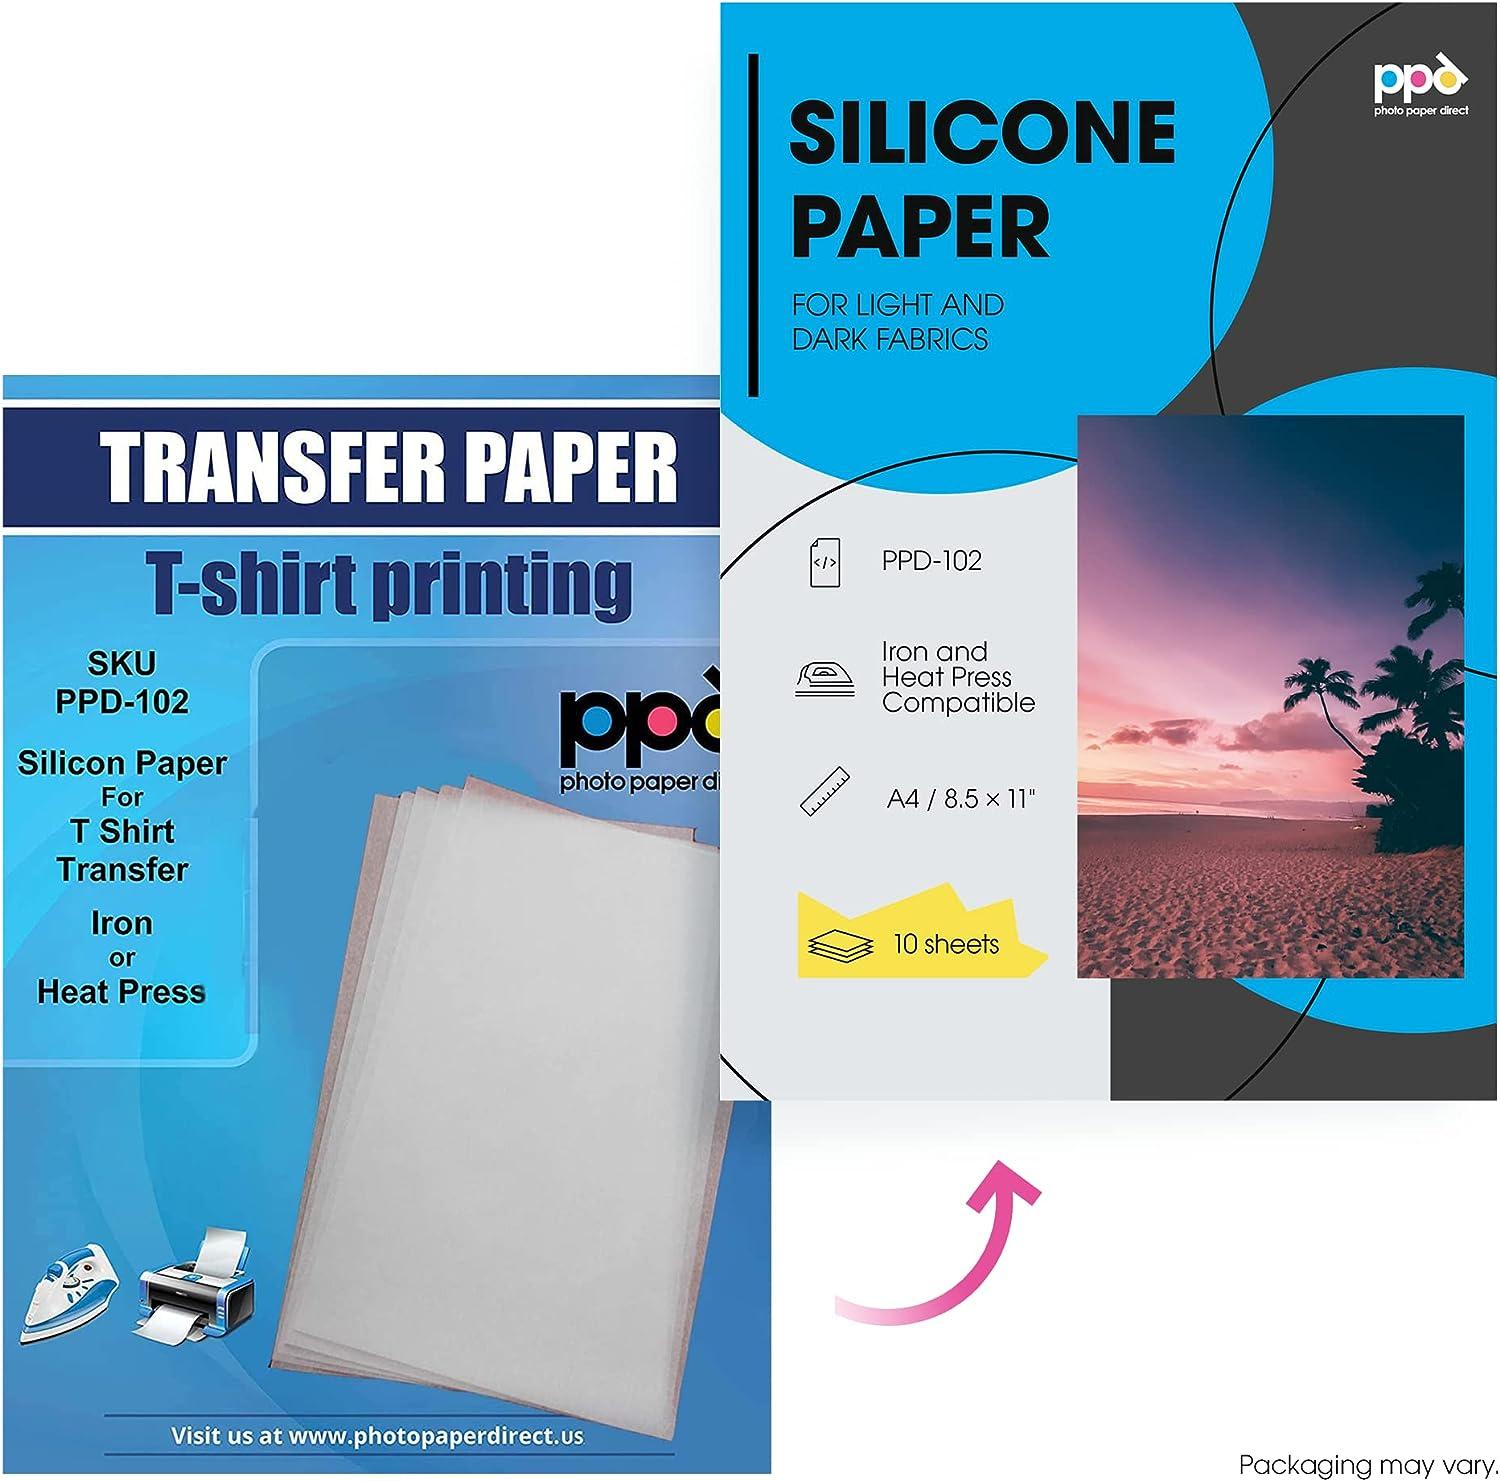 Where to Buy Heat Transfer Paper